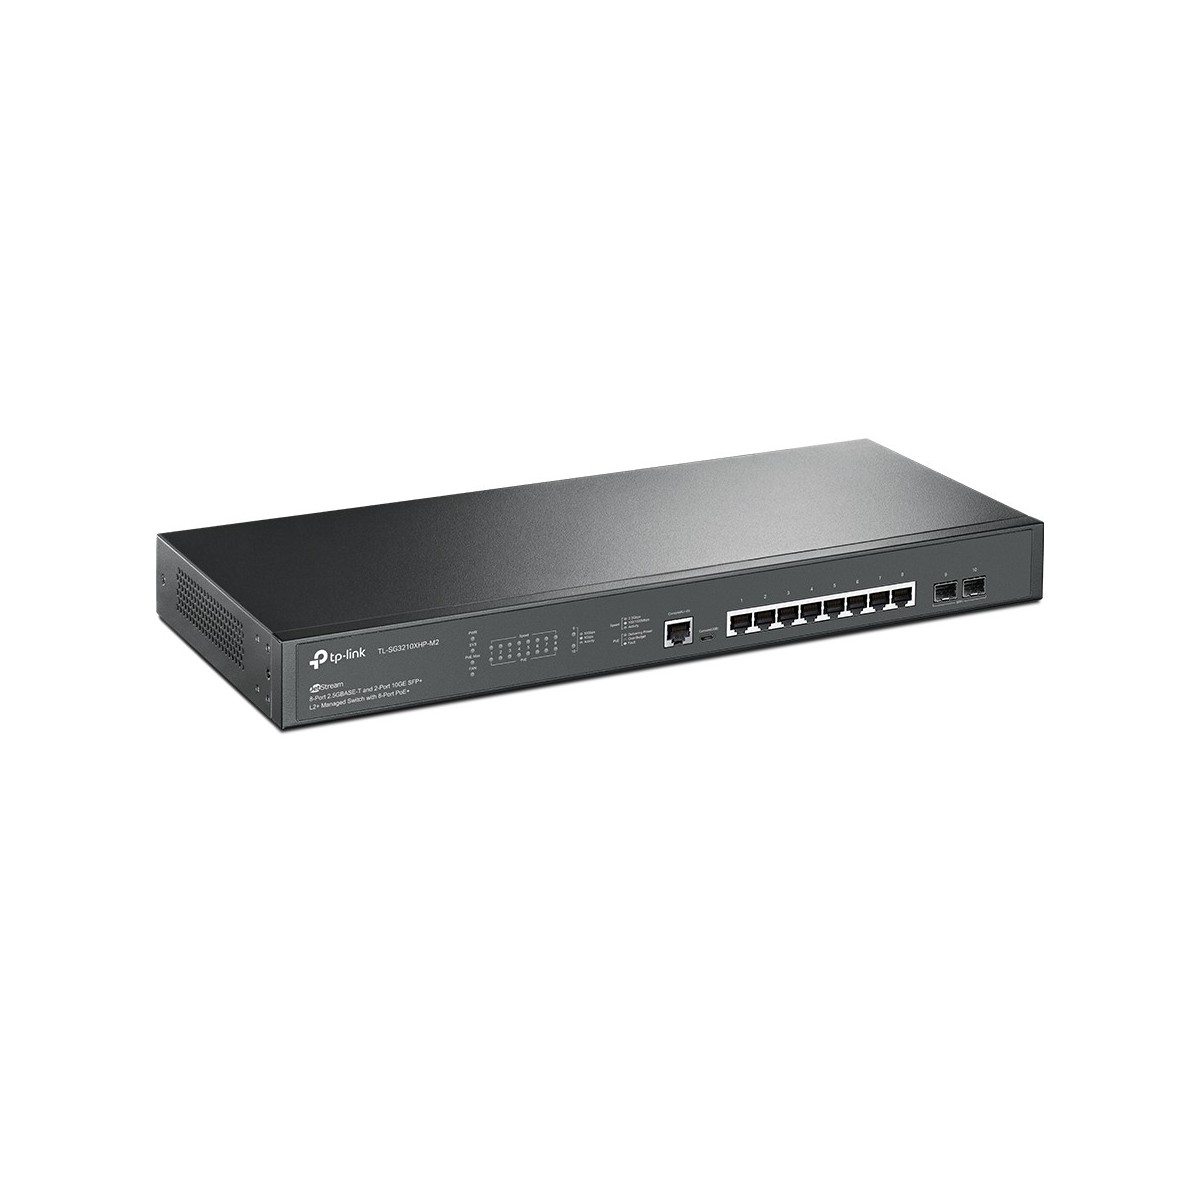 JetStream 8-Port 2.5GBASE-T and 2-Port 10GE SFP+ L2+ Managed Switch with 8-Port PoE+